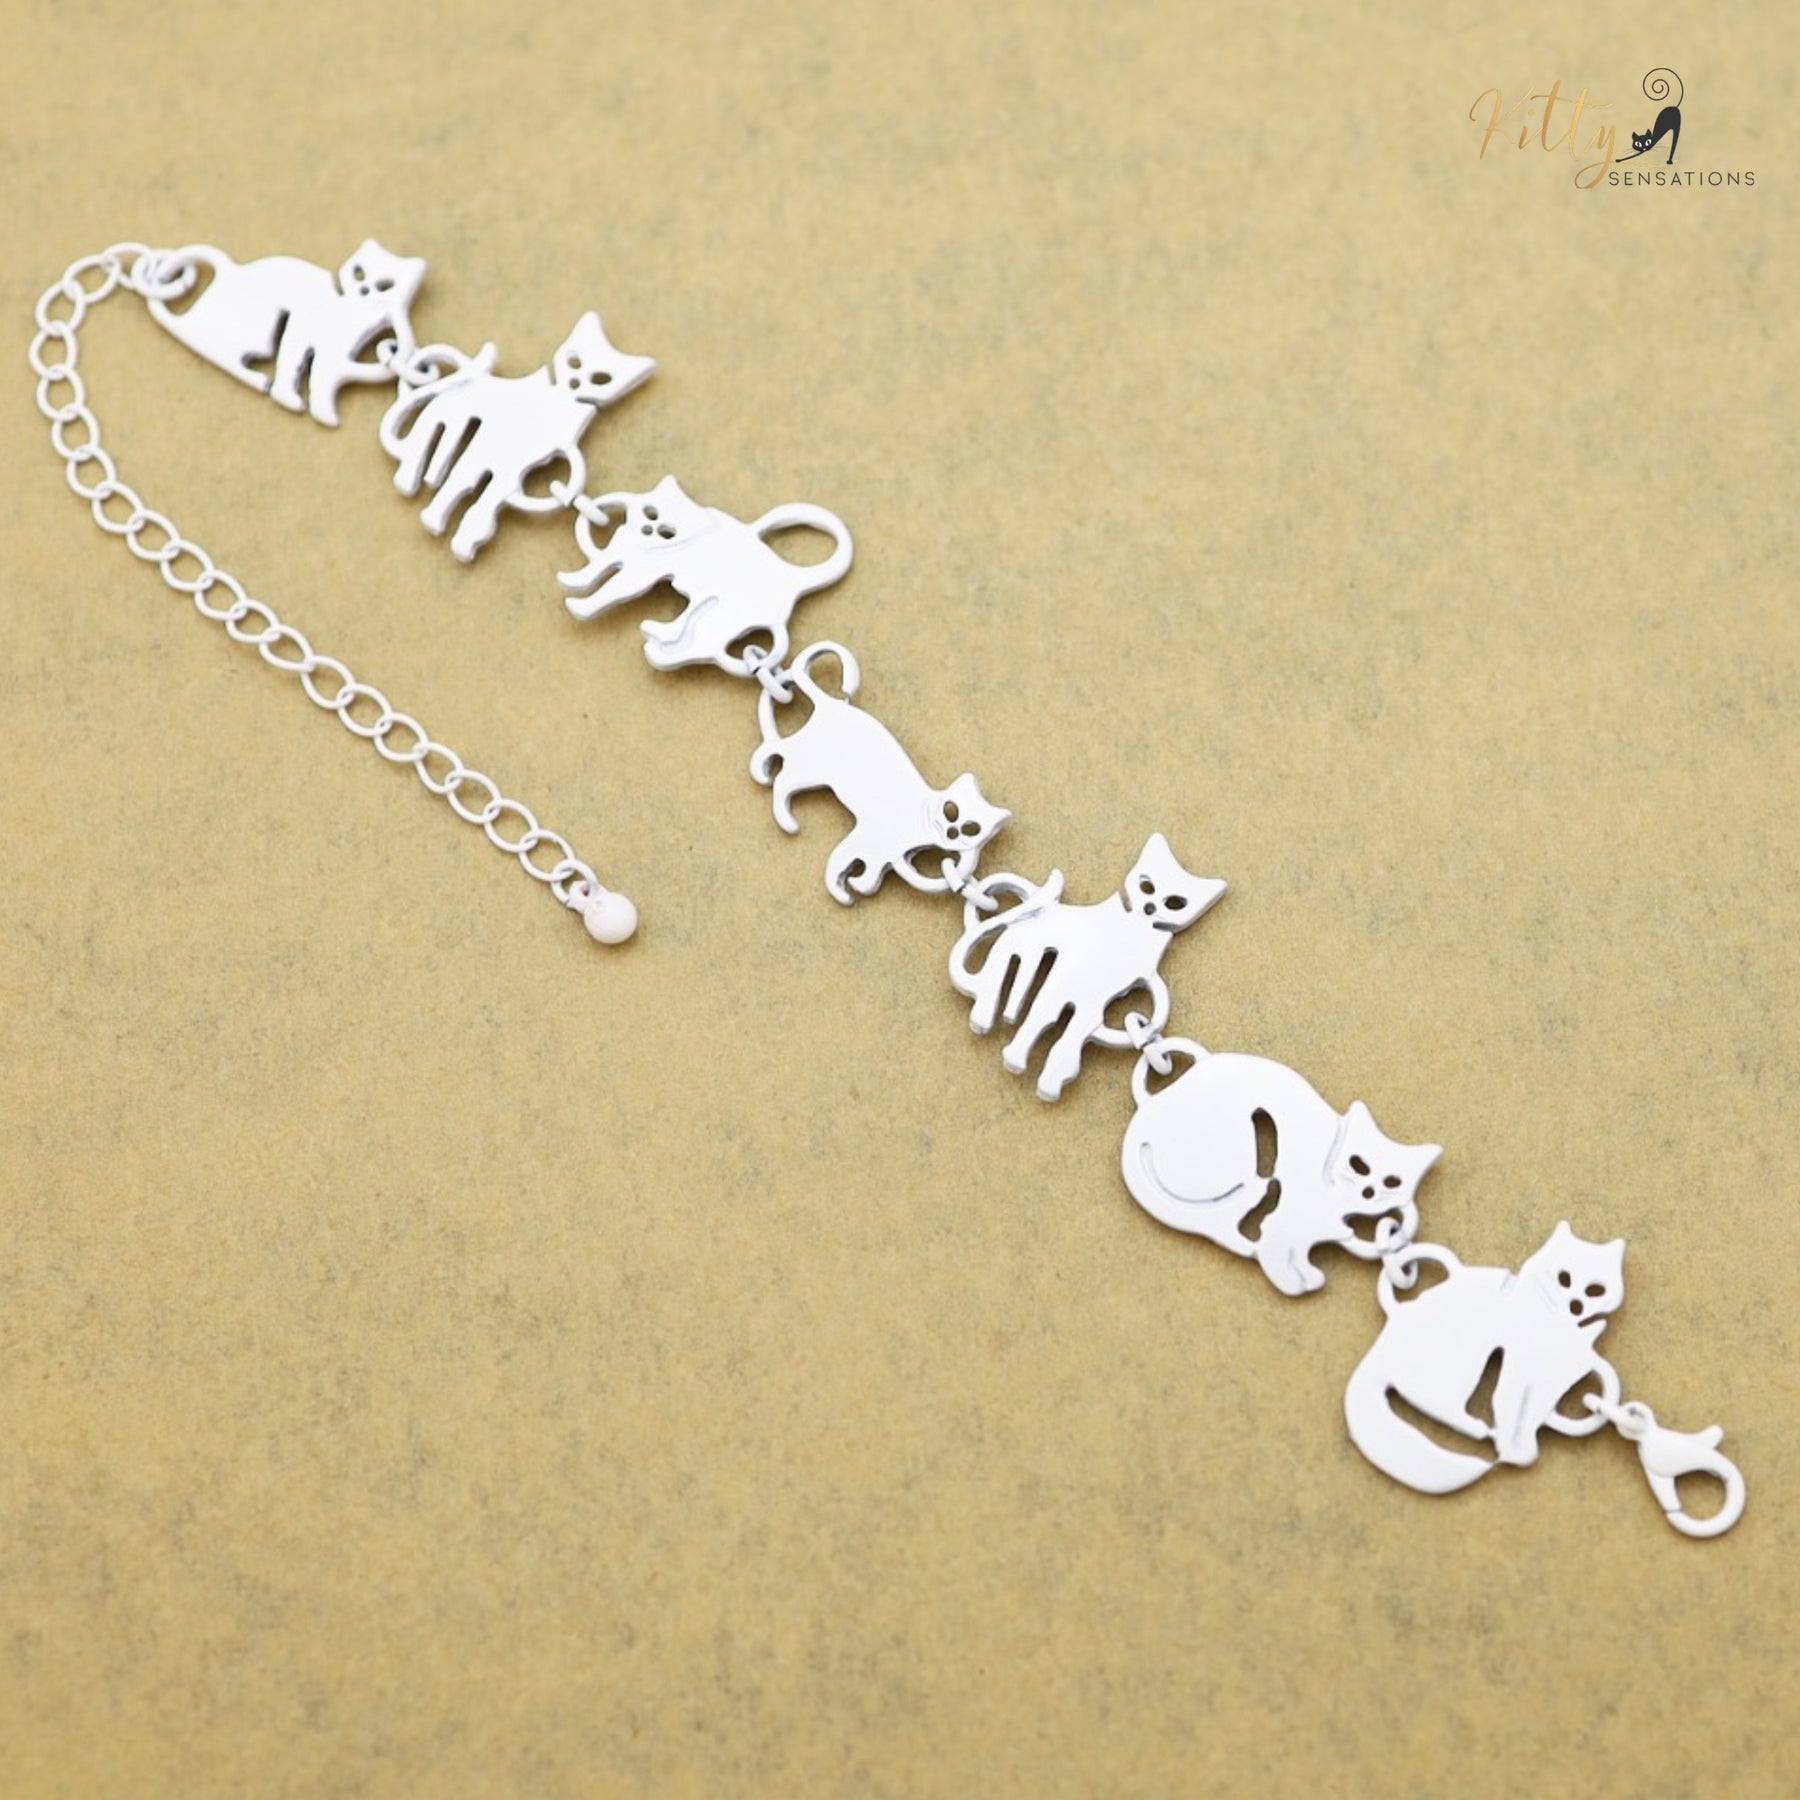 www.KittySensations.com Charm Chain Cat Bracelet - Gold and Silver Plated - Adjustable Size ($15.97): https://www.kittysensations.com/products/charm-chain-cat-bracelet-gold-and-silver-plated